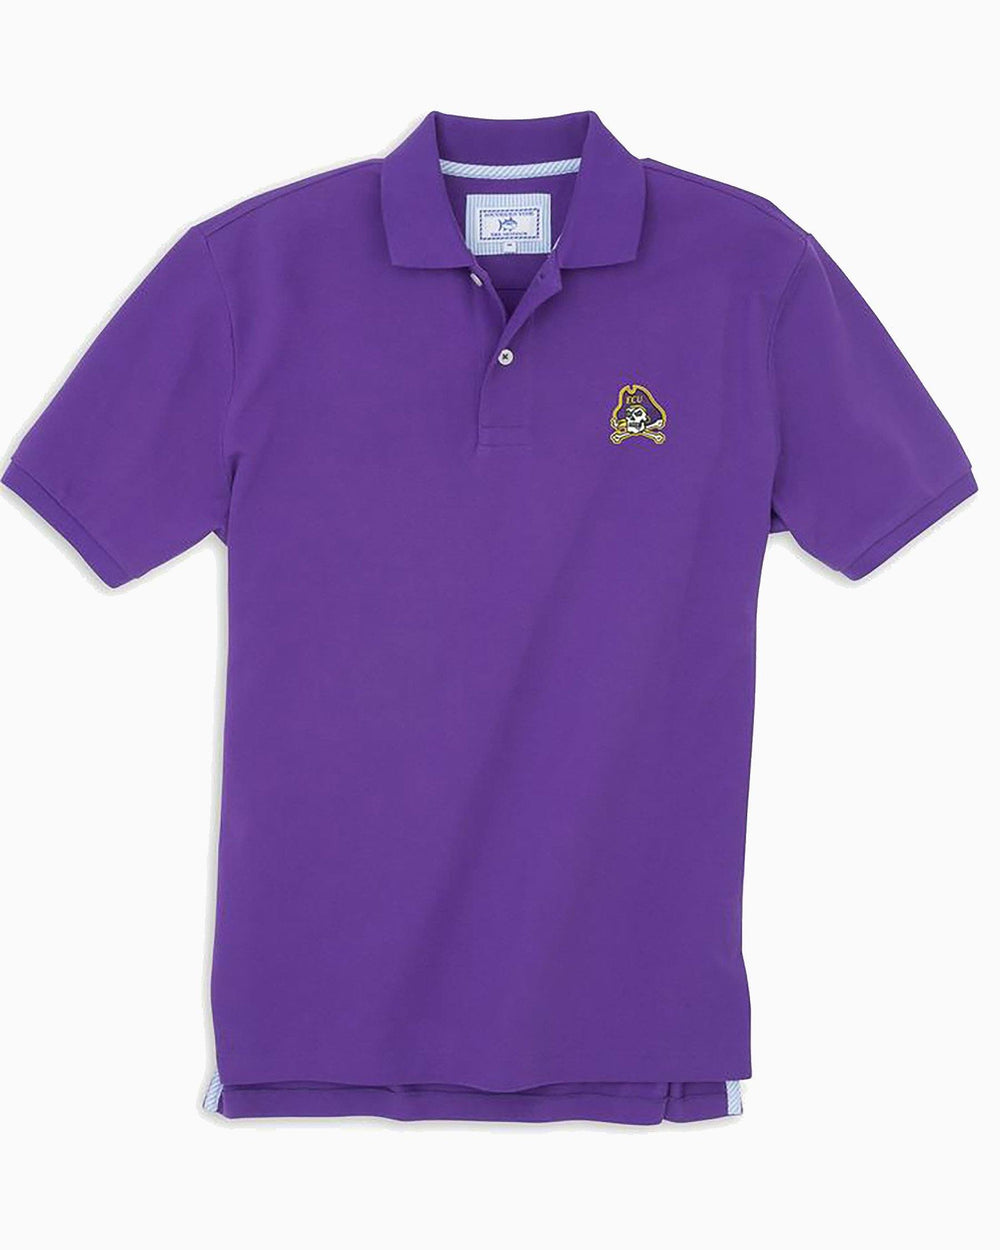 The front view of the Men's Purple East Carolina Pique Polo Shirt by Southern Tide - Regal Purple